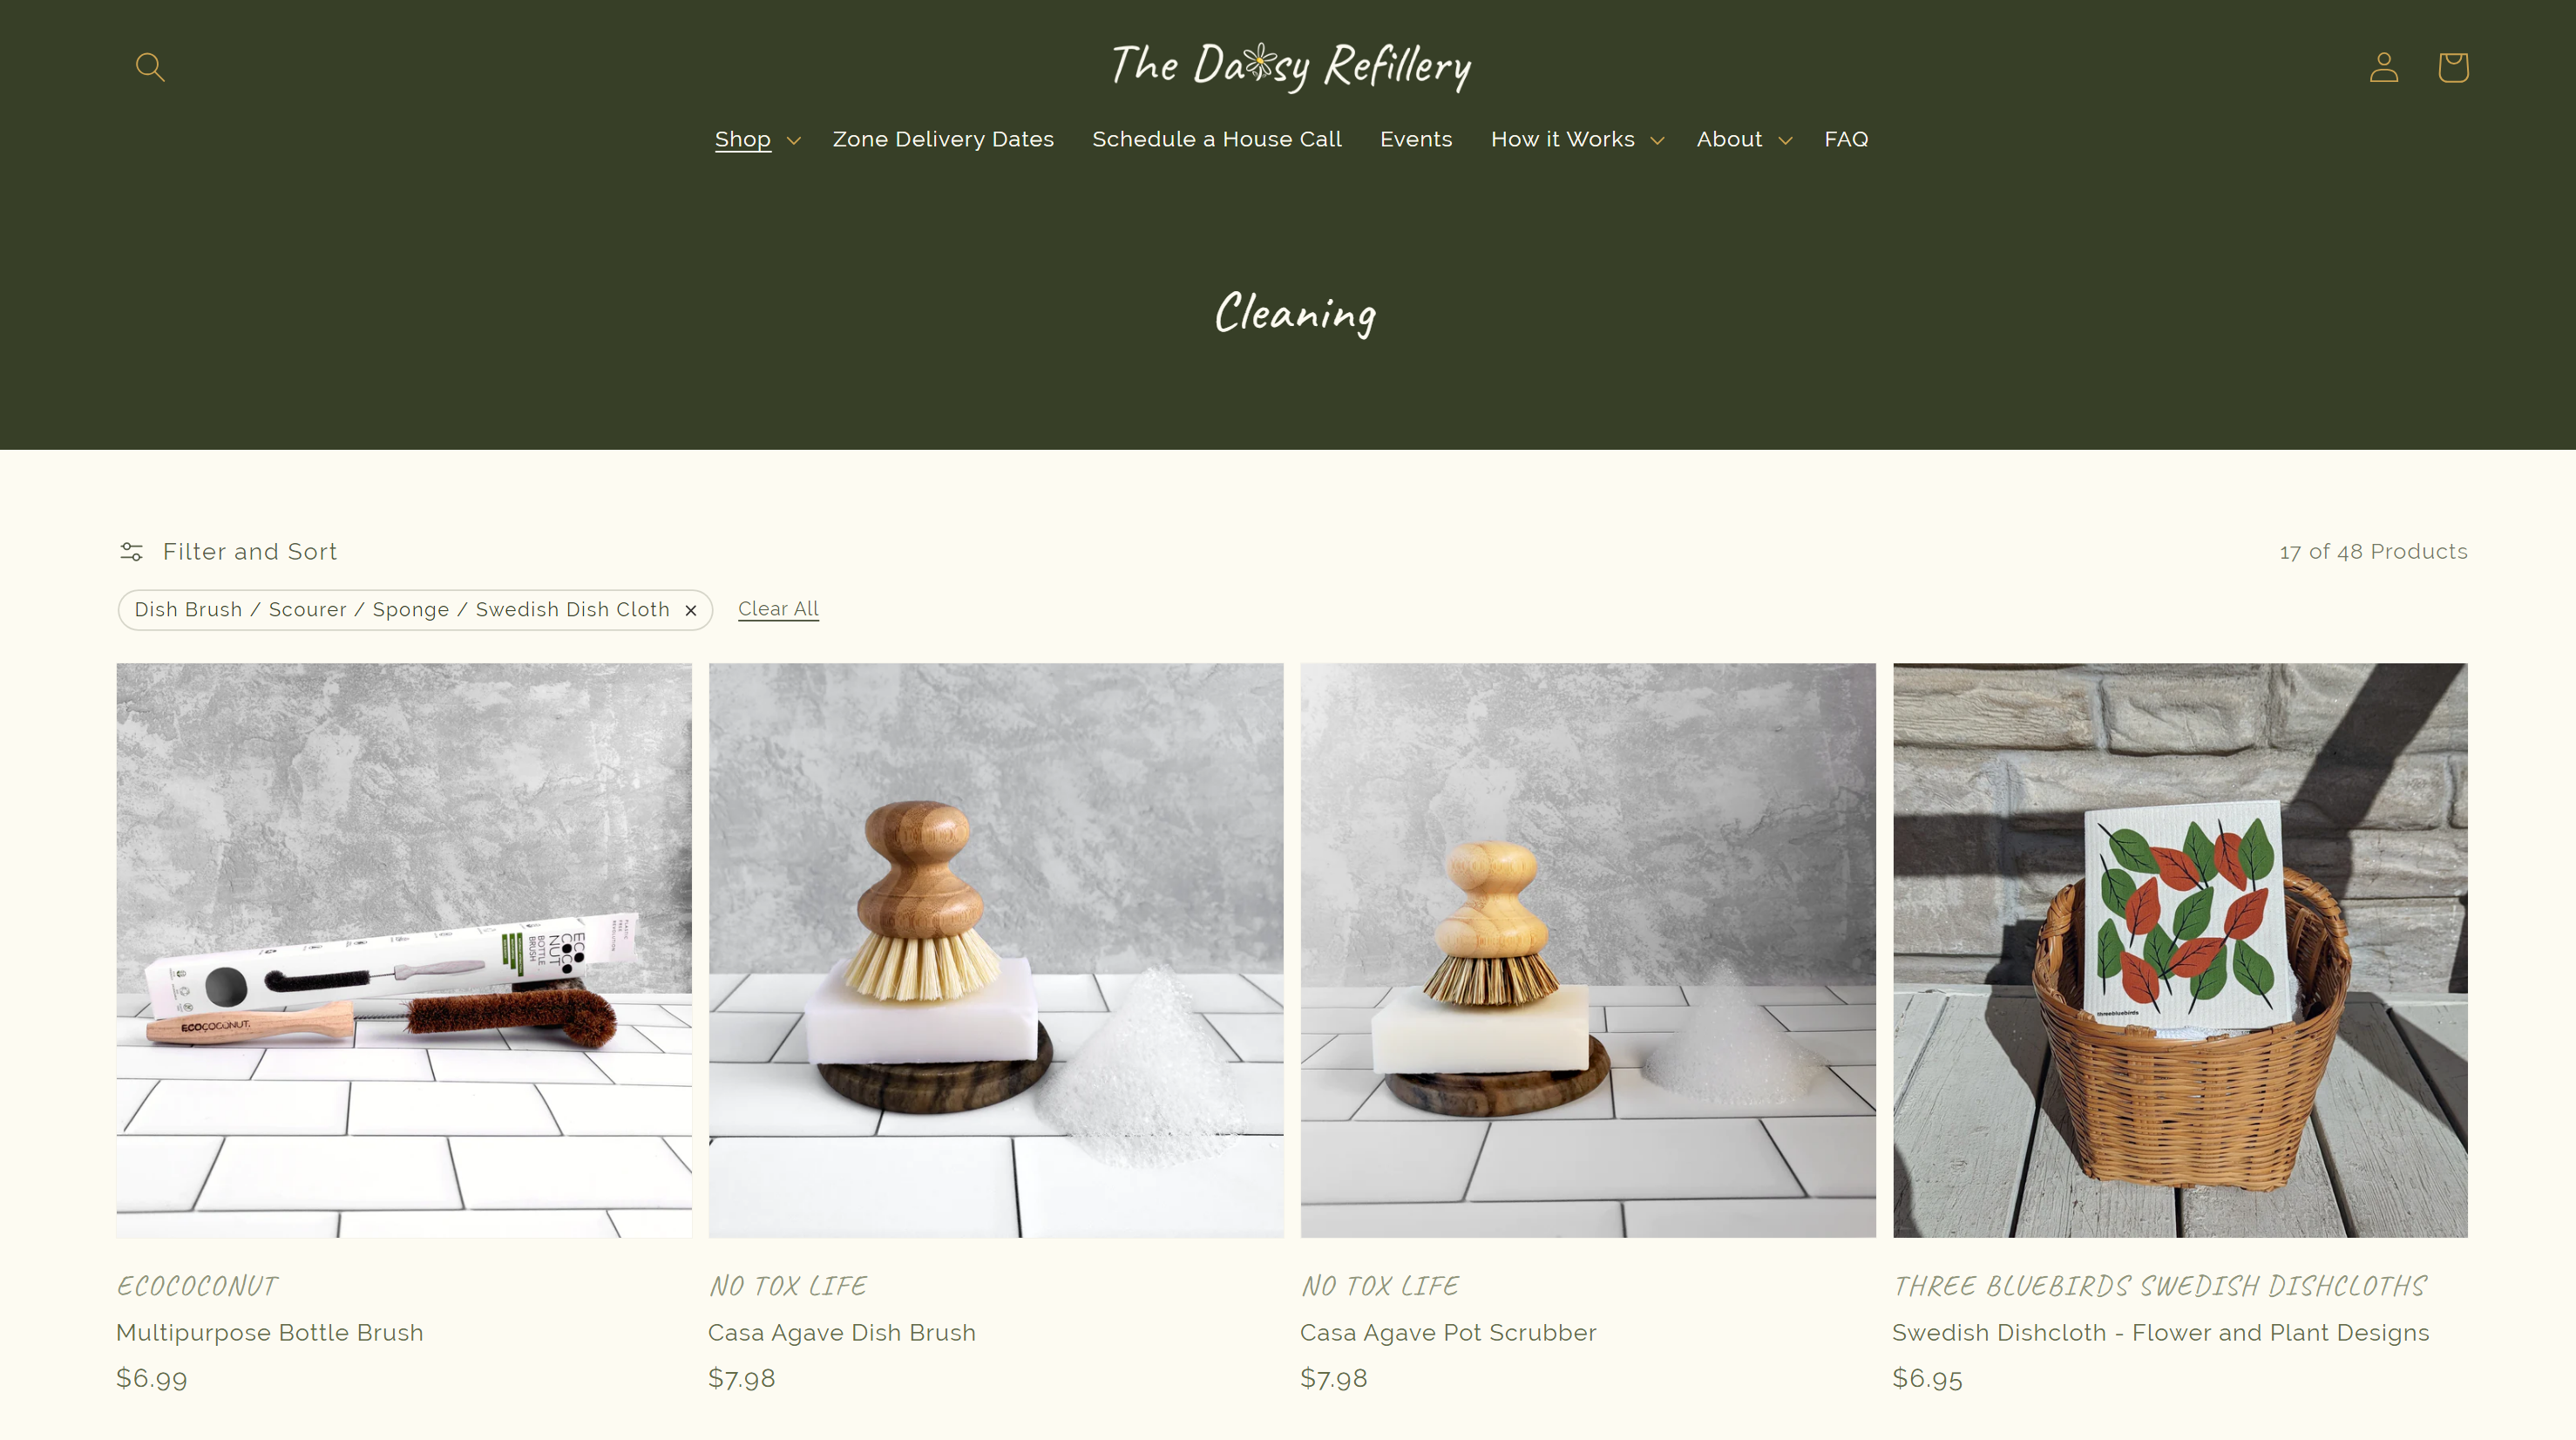 The Daisy Refillery Filtered Products